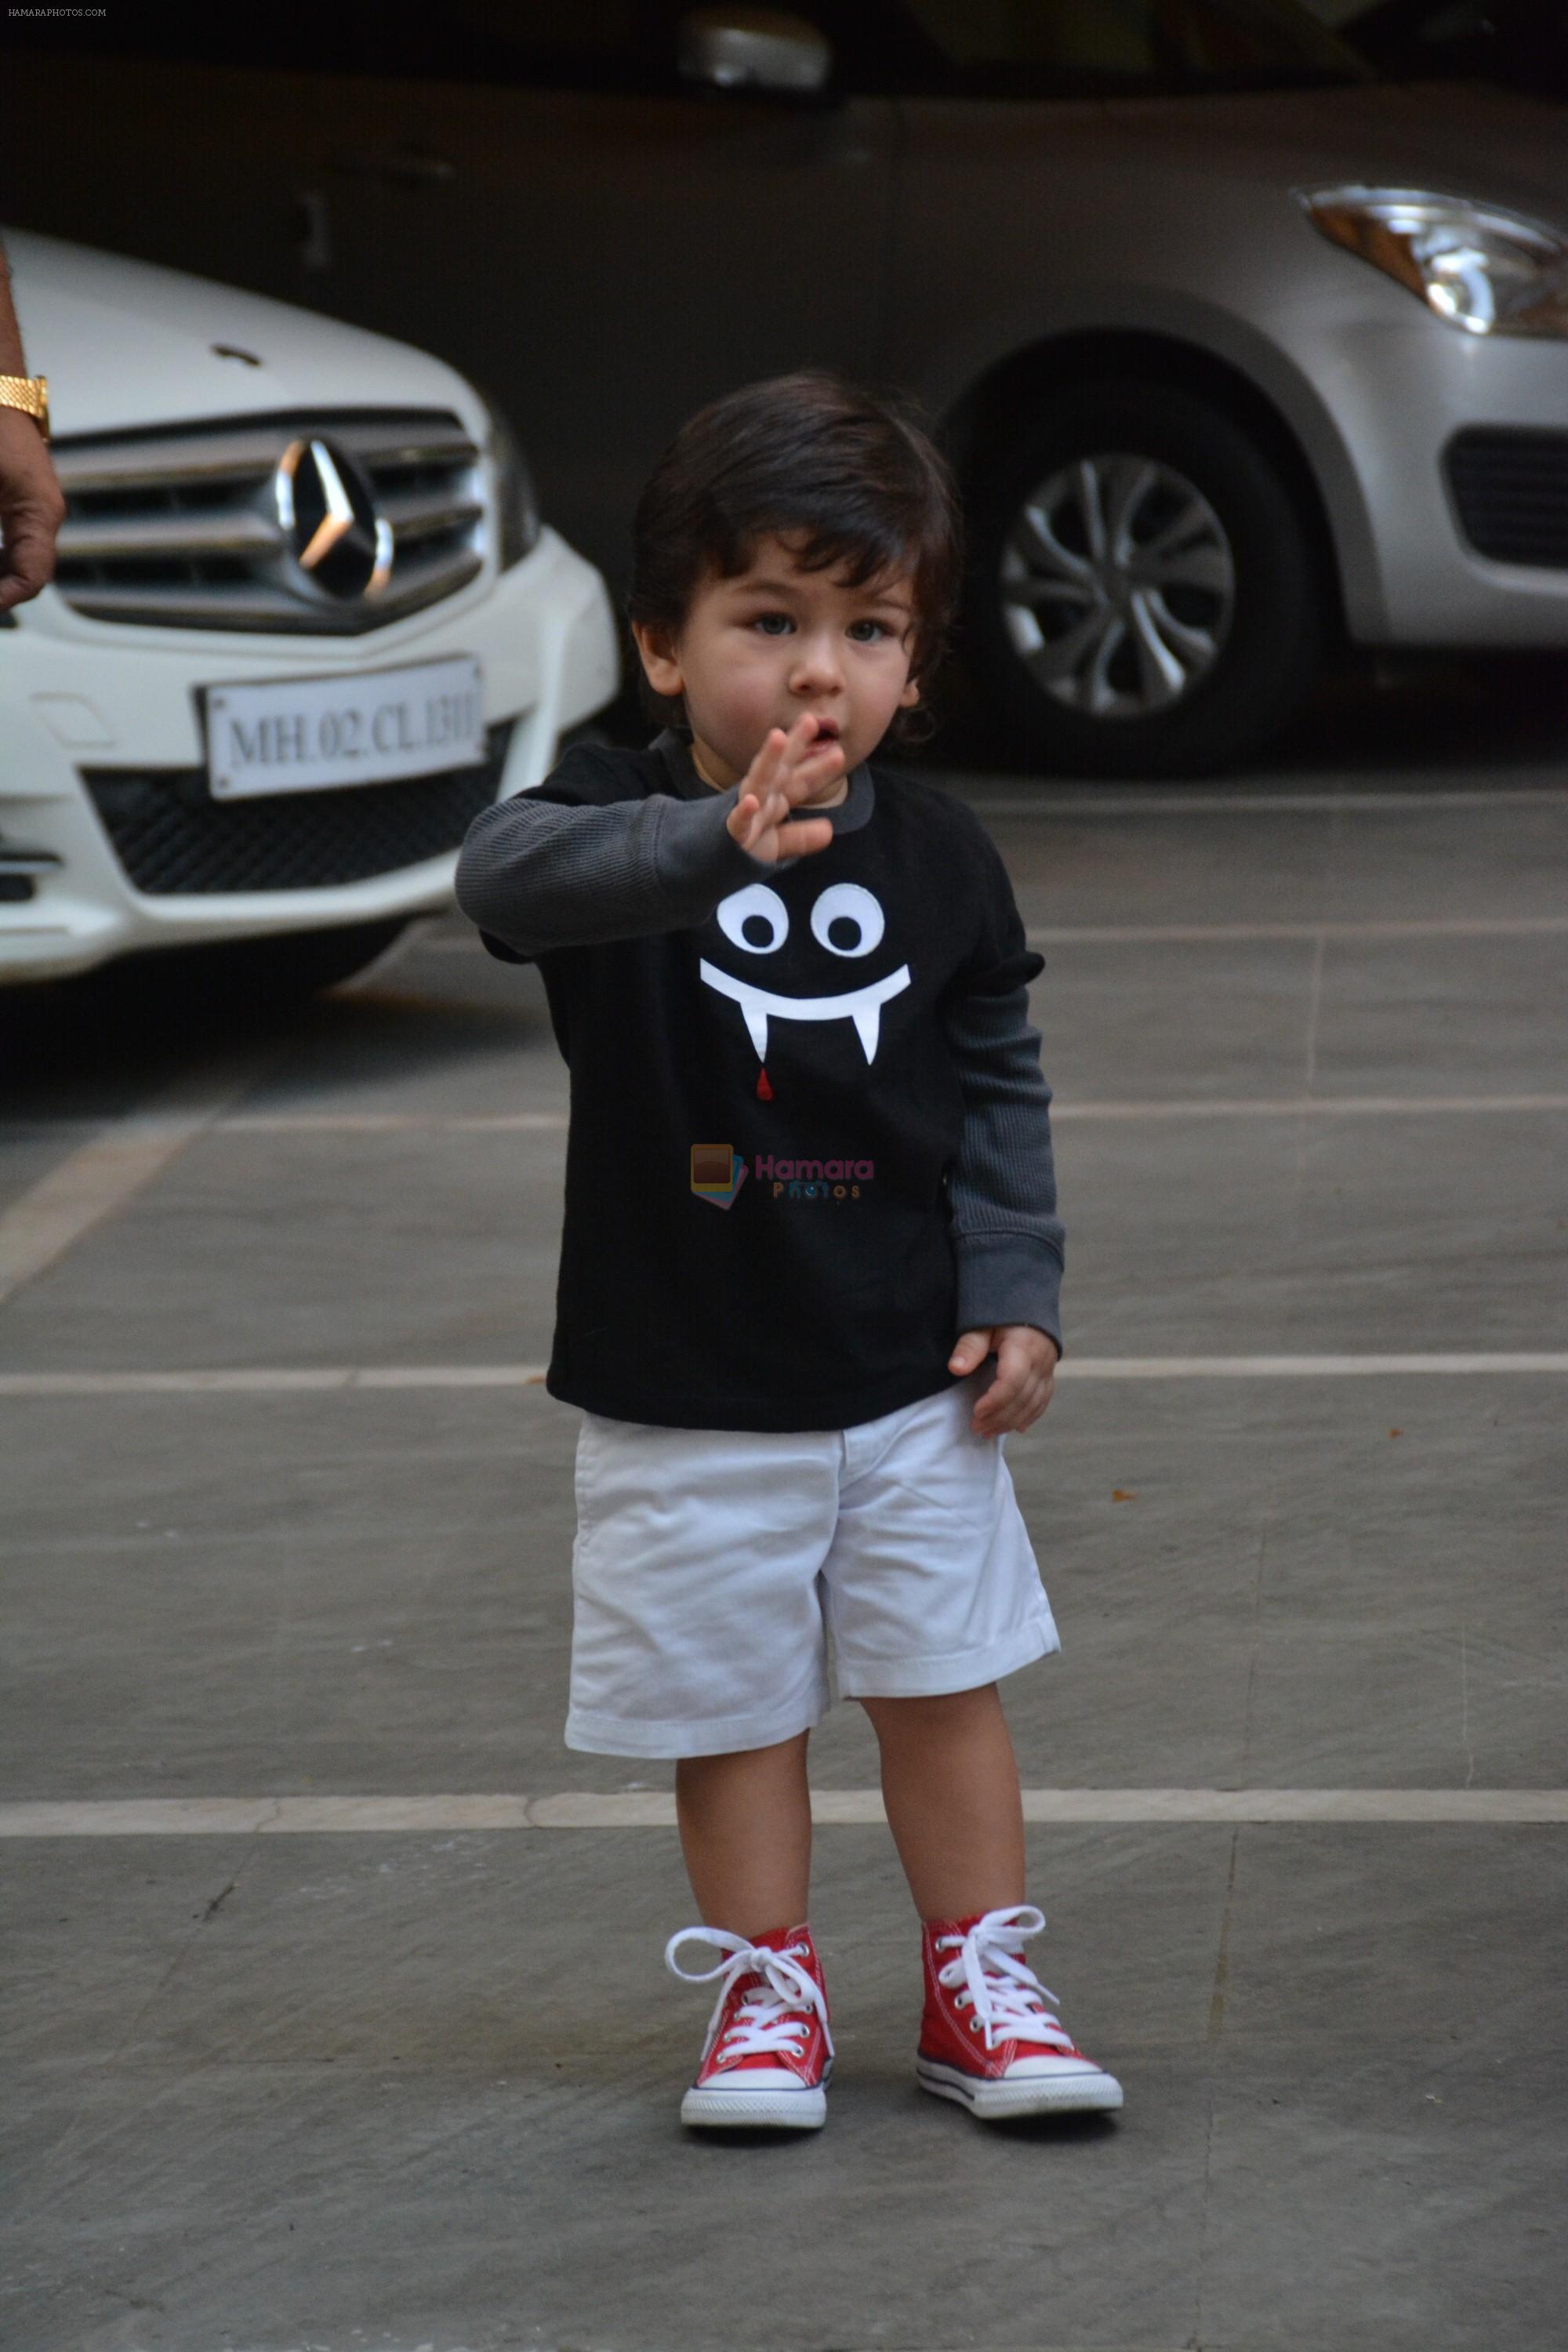 Taimur Ali Khan Spotted At Bandra on 31st Oct 2018